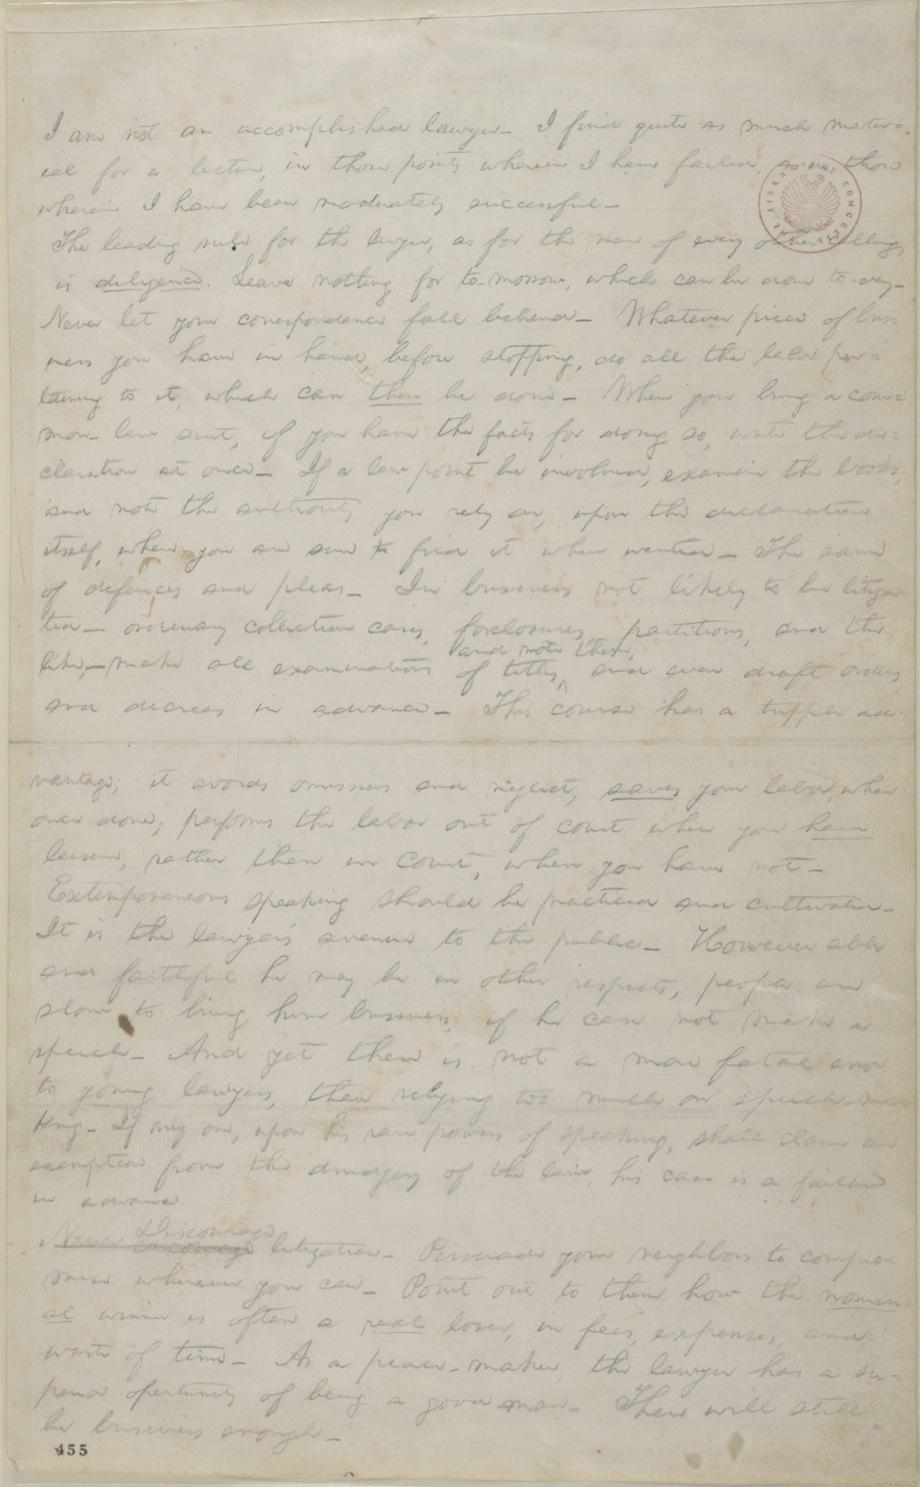 Lincoln's notes for a lecture on law